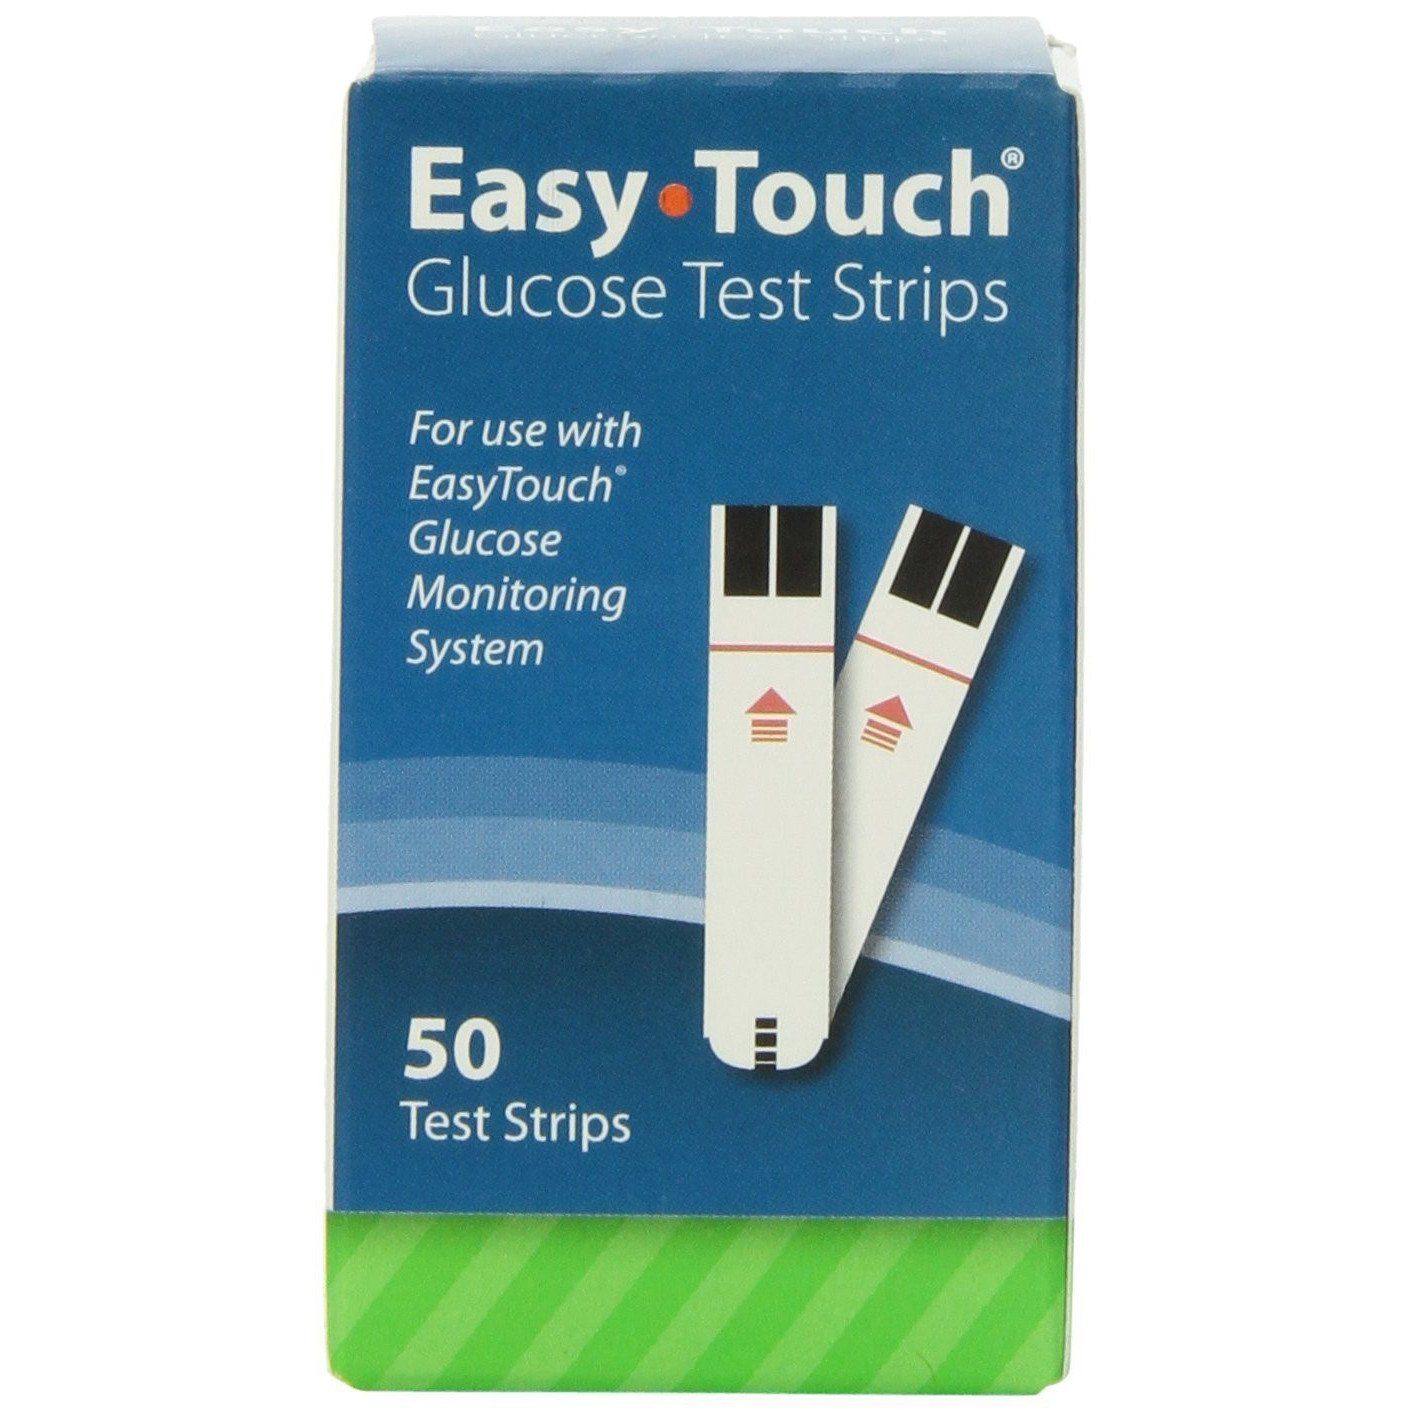 Blood Glucose Test Strips for Diabetes: for Use with Easy@Home Blood S